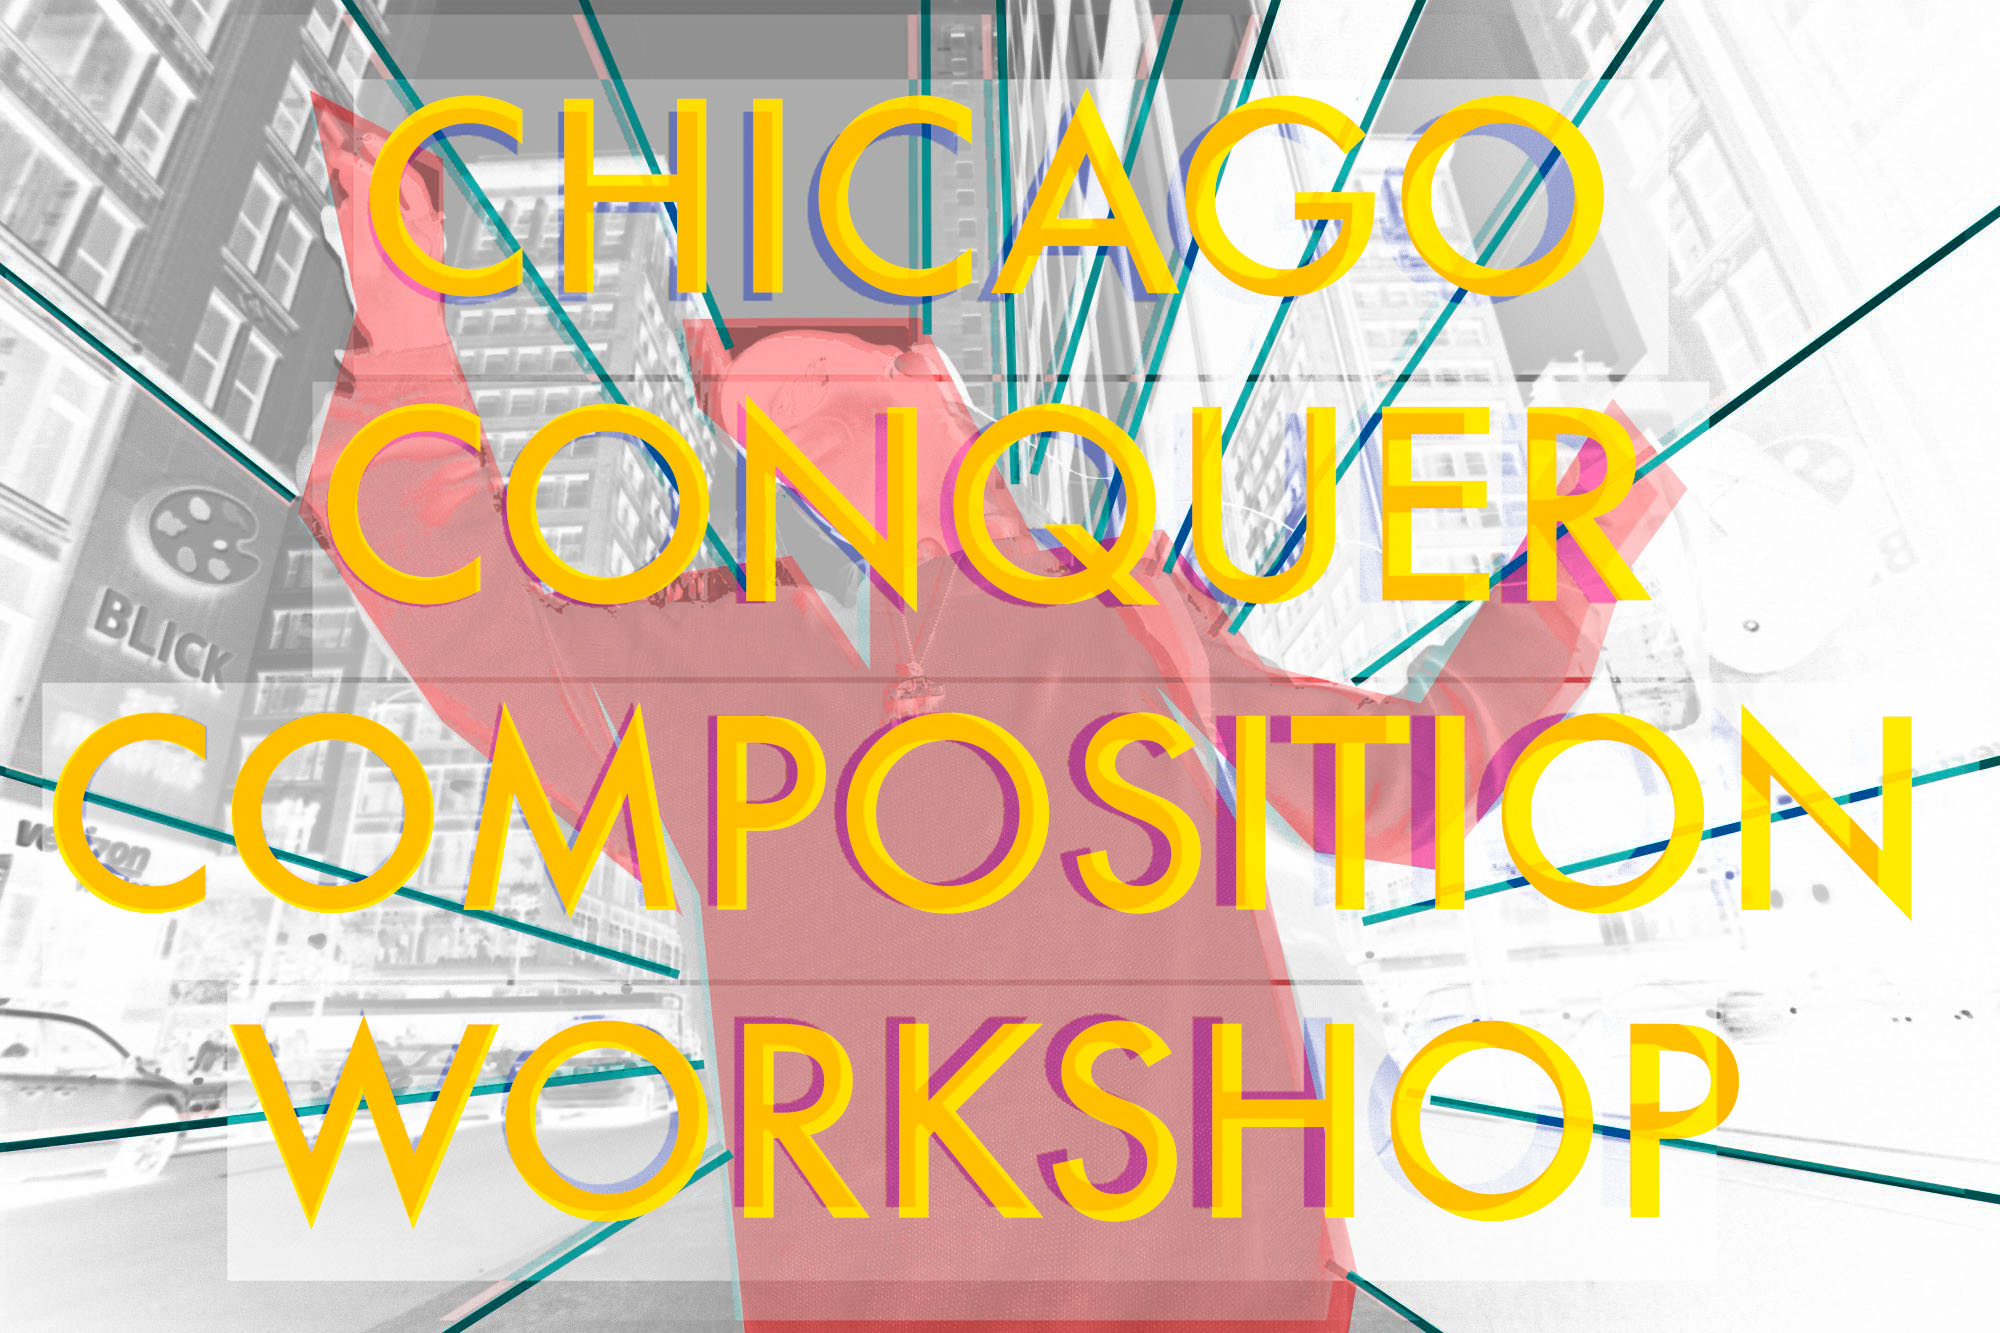 CHICAGO CONQUER COMPOSITION Street Photography Workshop (May 22-23rd, 2021)